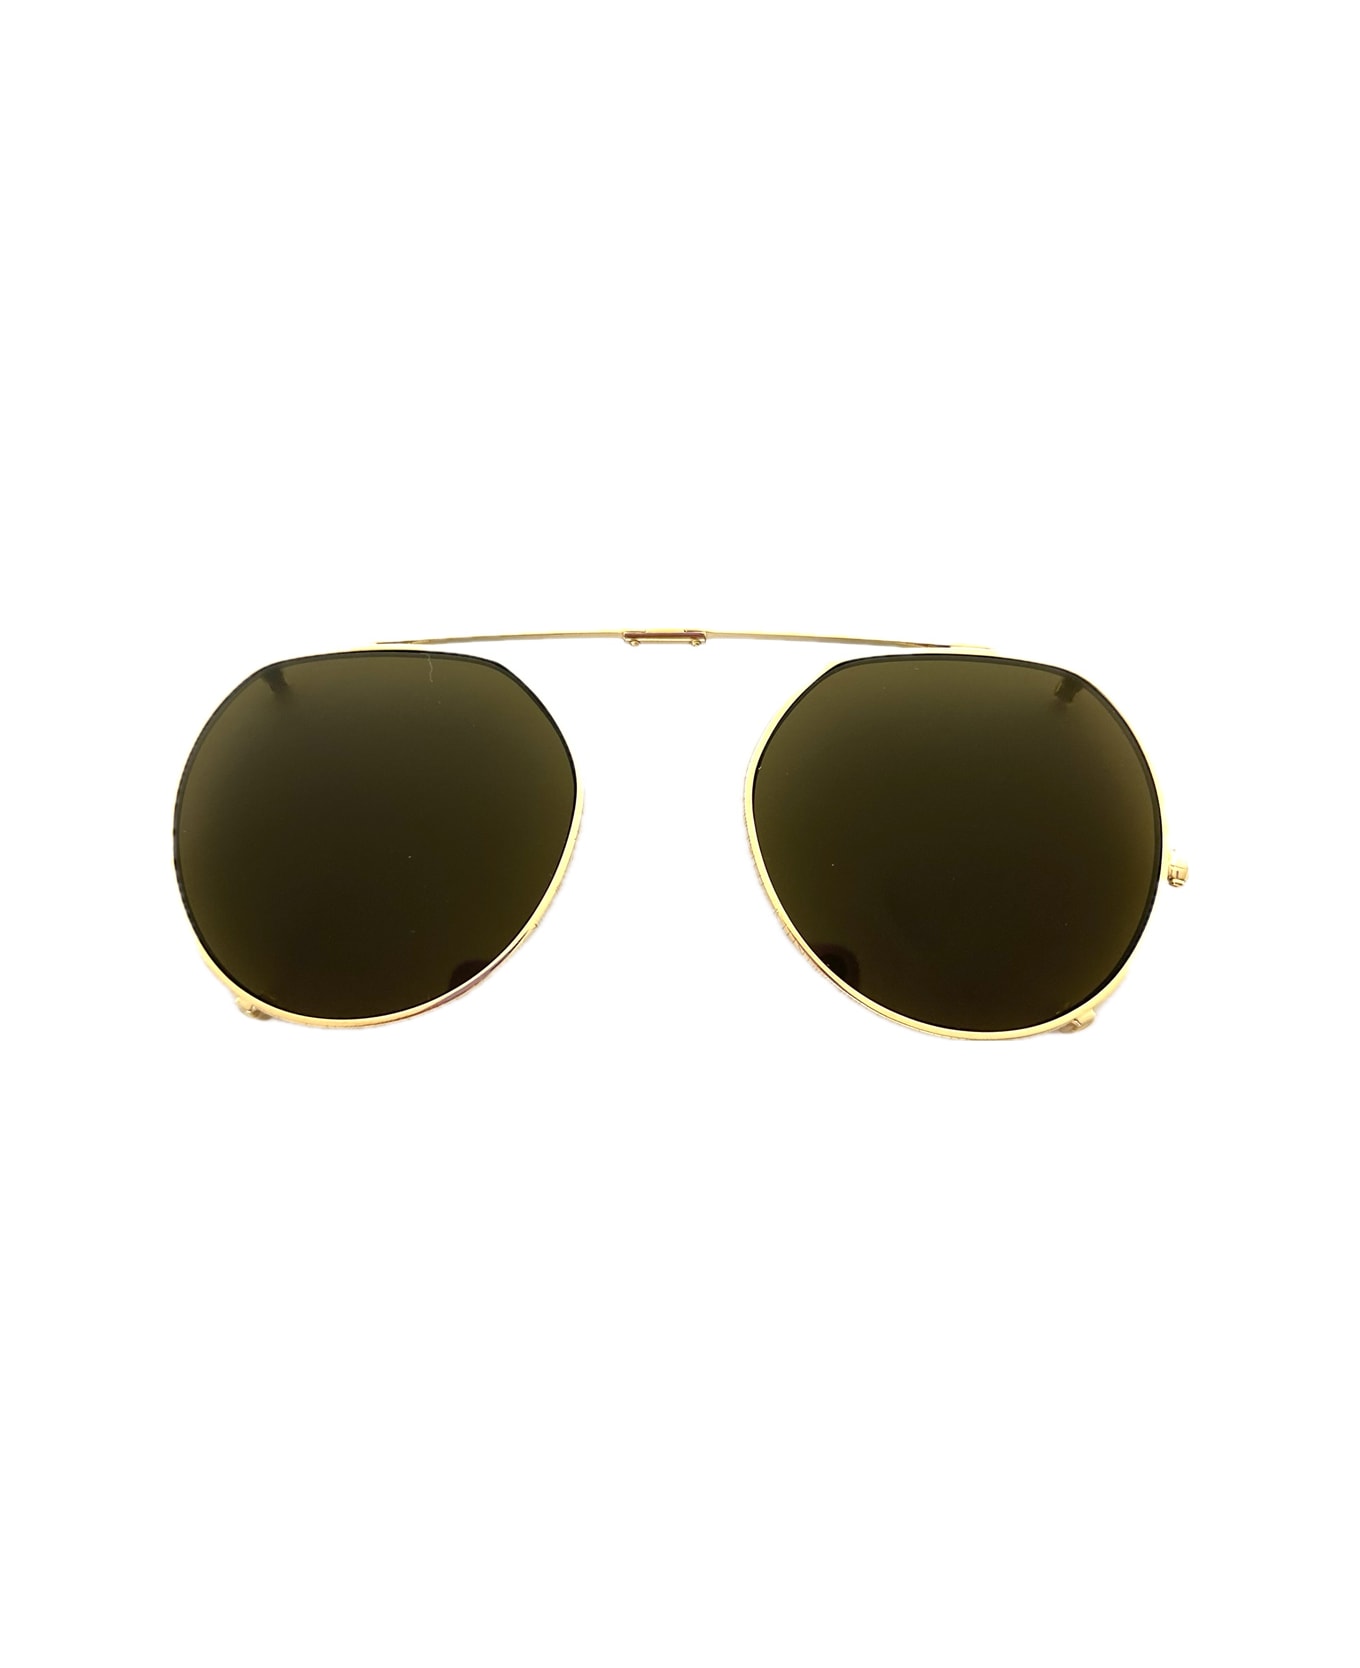 AHLEM Place Dauphine Clip Champagne Sunglasses - Oro